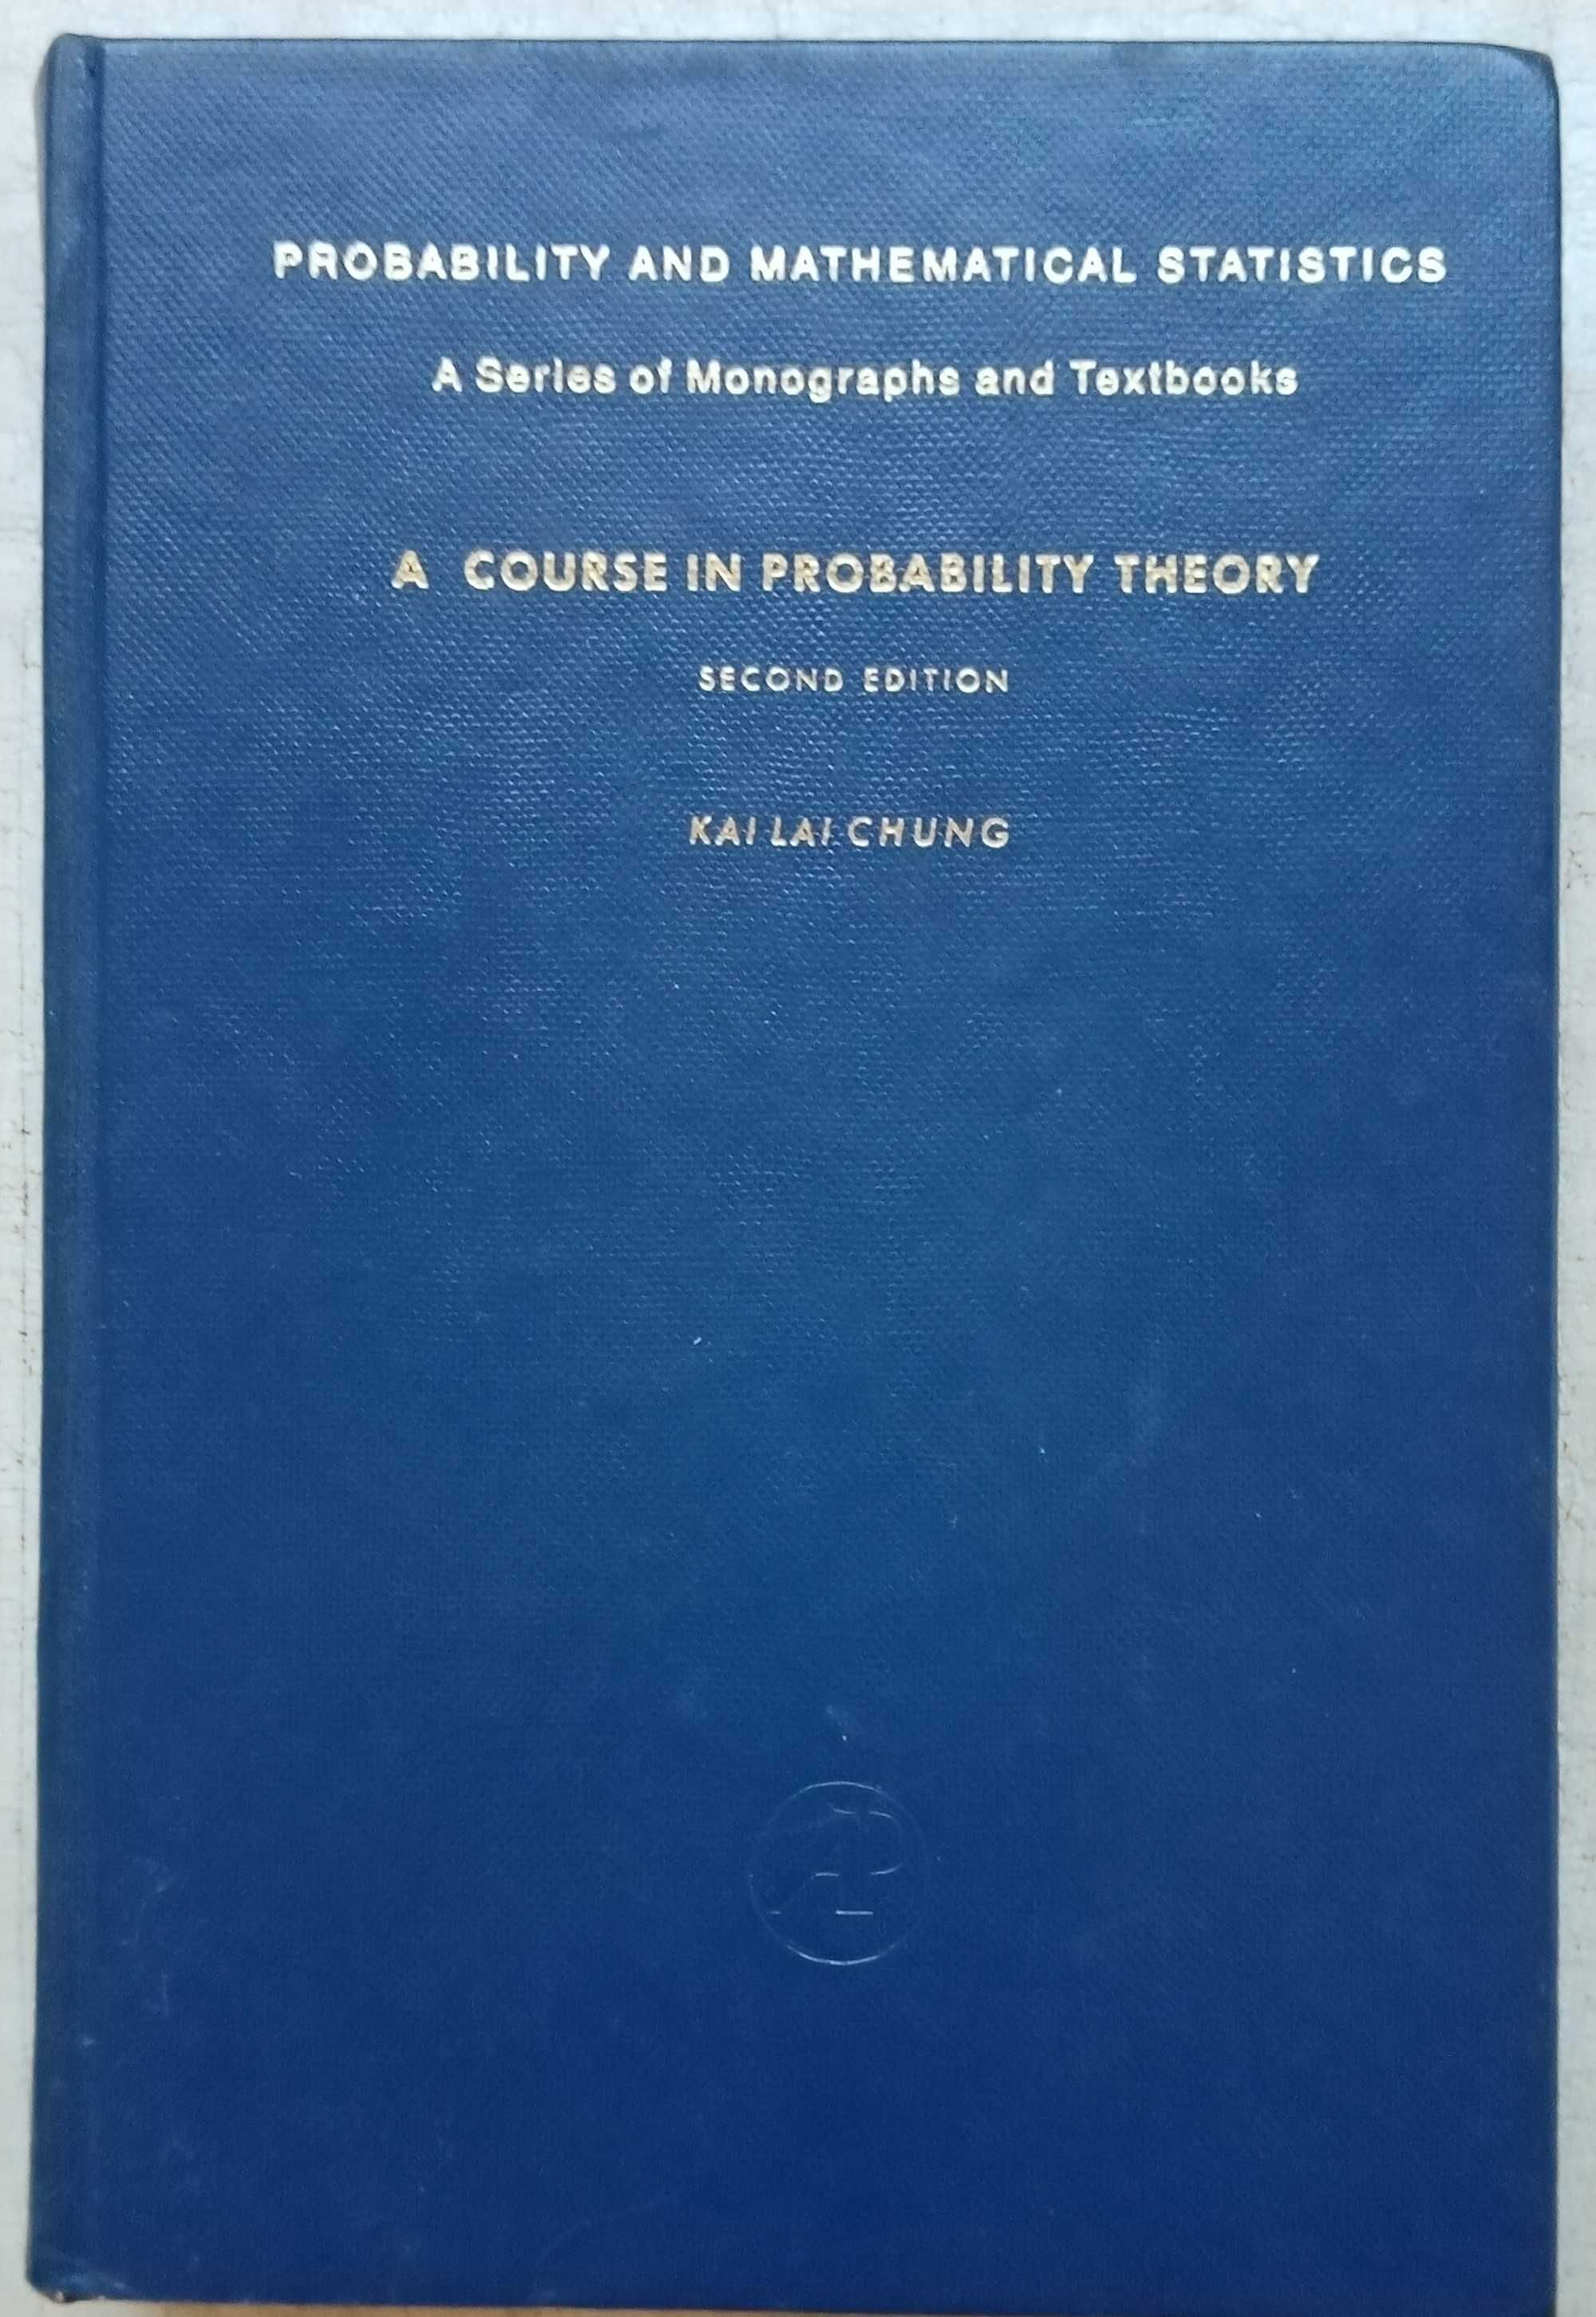 A Course in Probability Theory (2nd Edition)
Kai Lai Chung